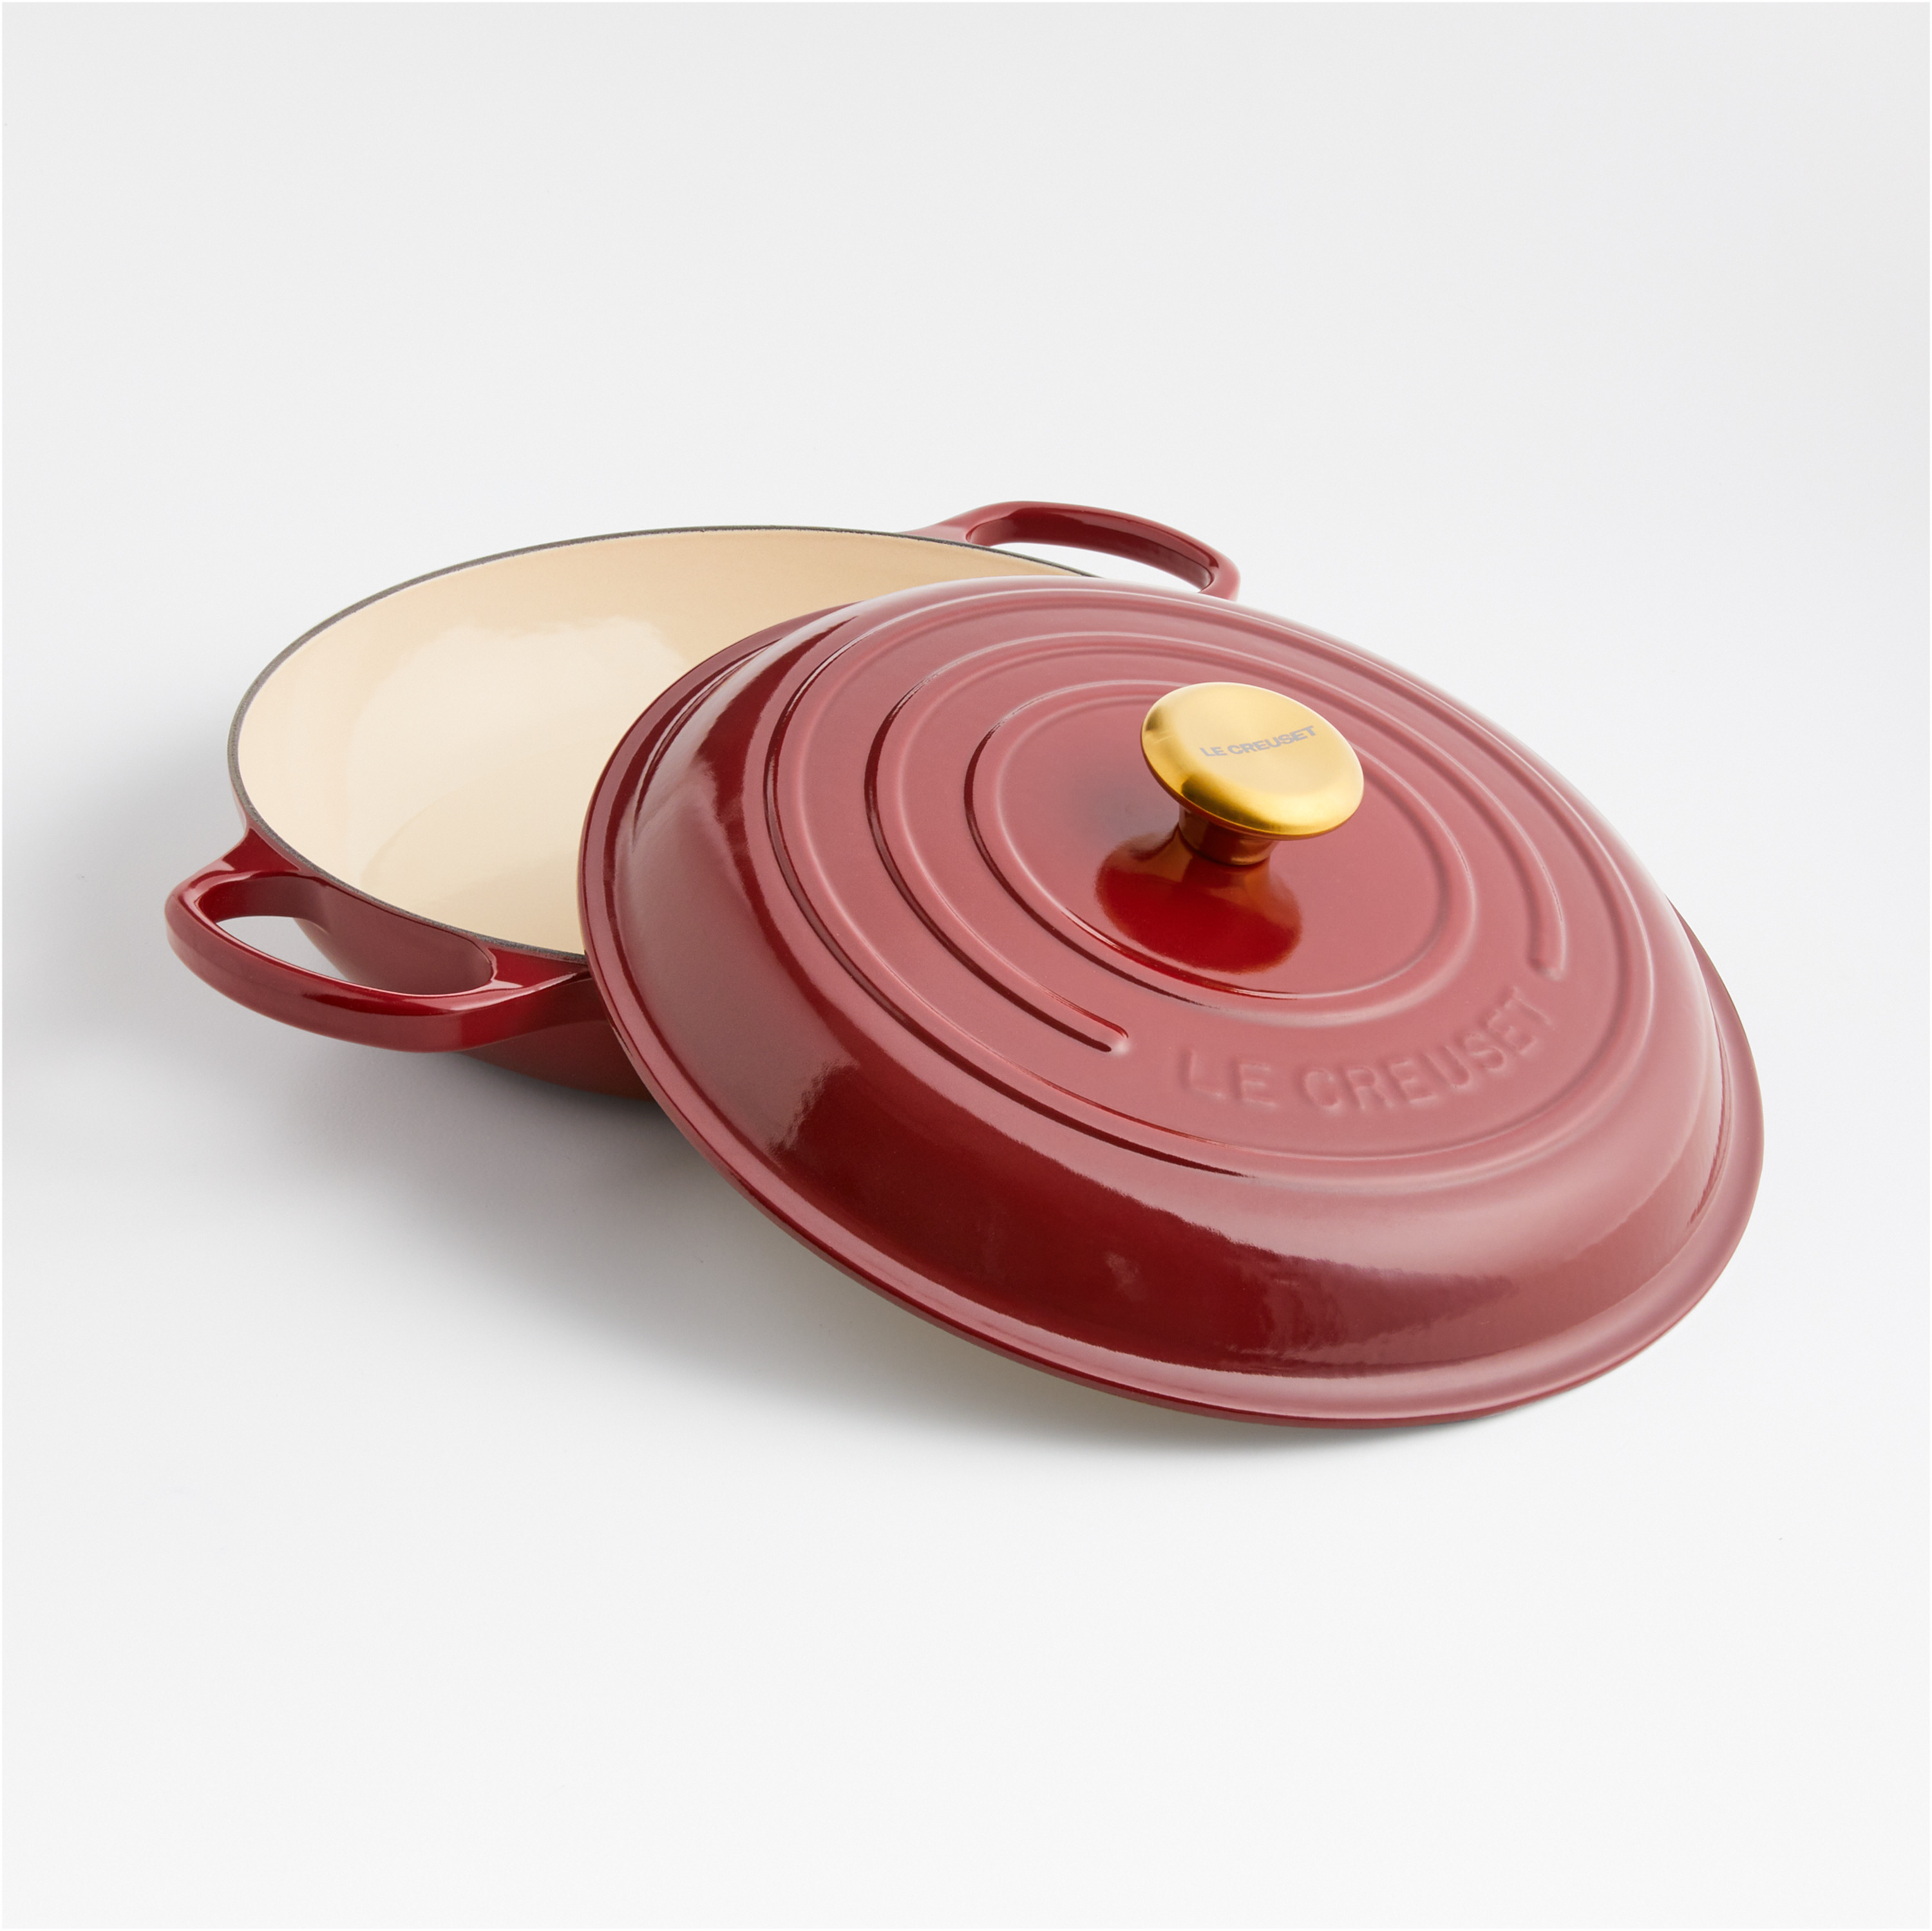 Le Creuset Just Launched a New Hue: Rhone